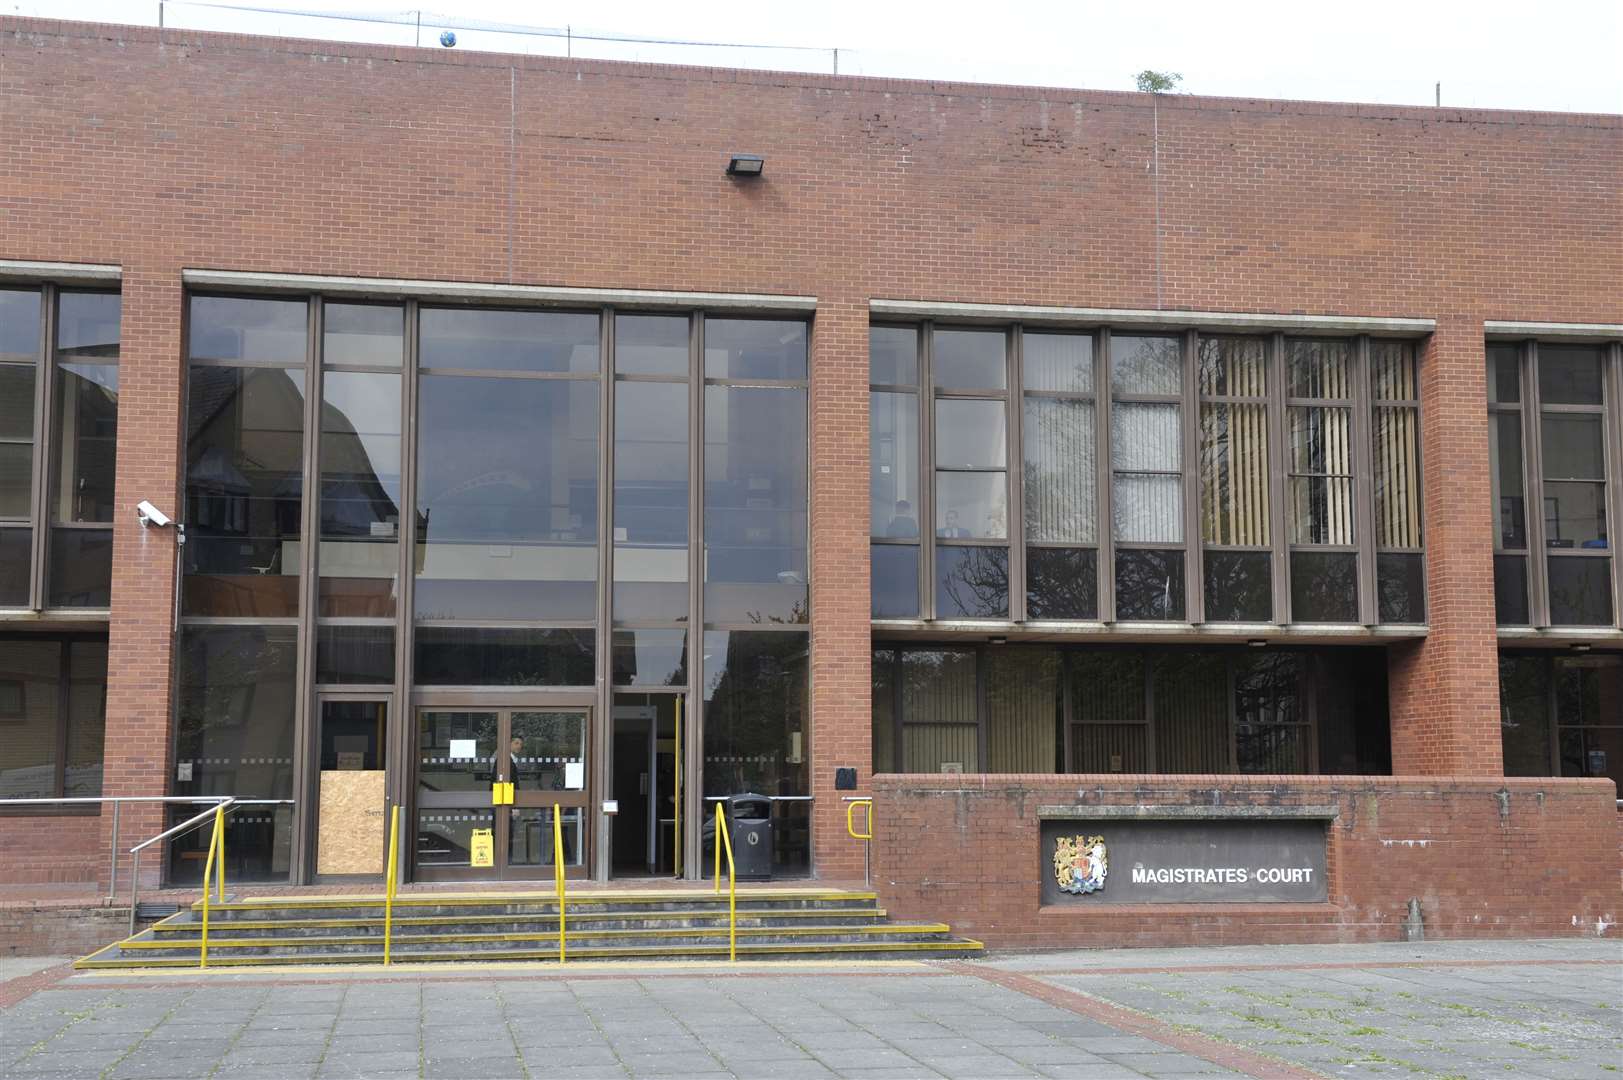 The defendants appeared at Folkestone Magistrates' Court